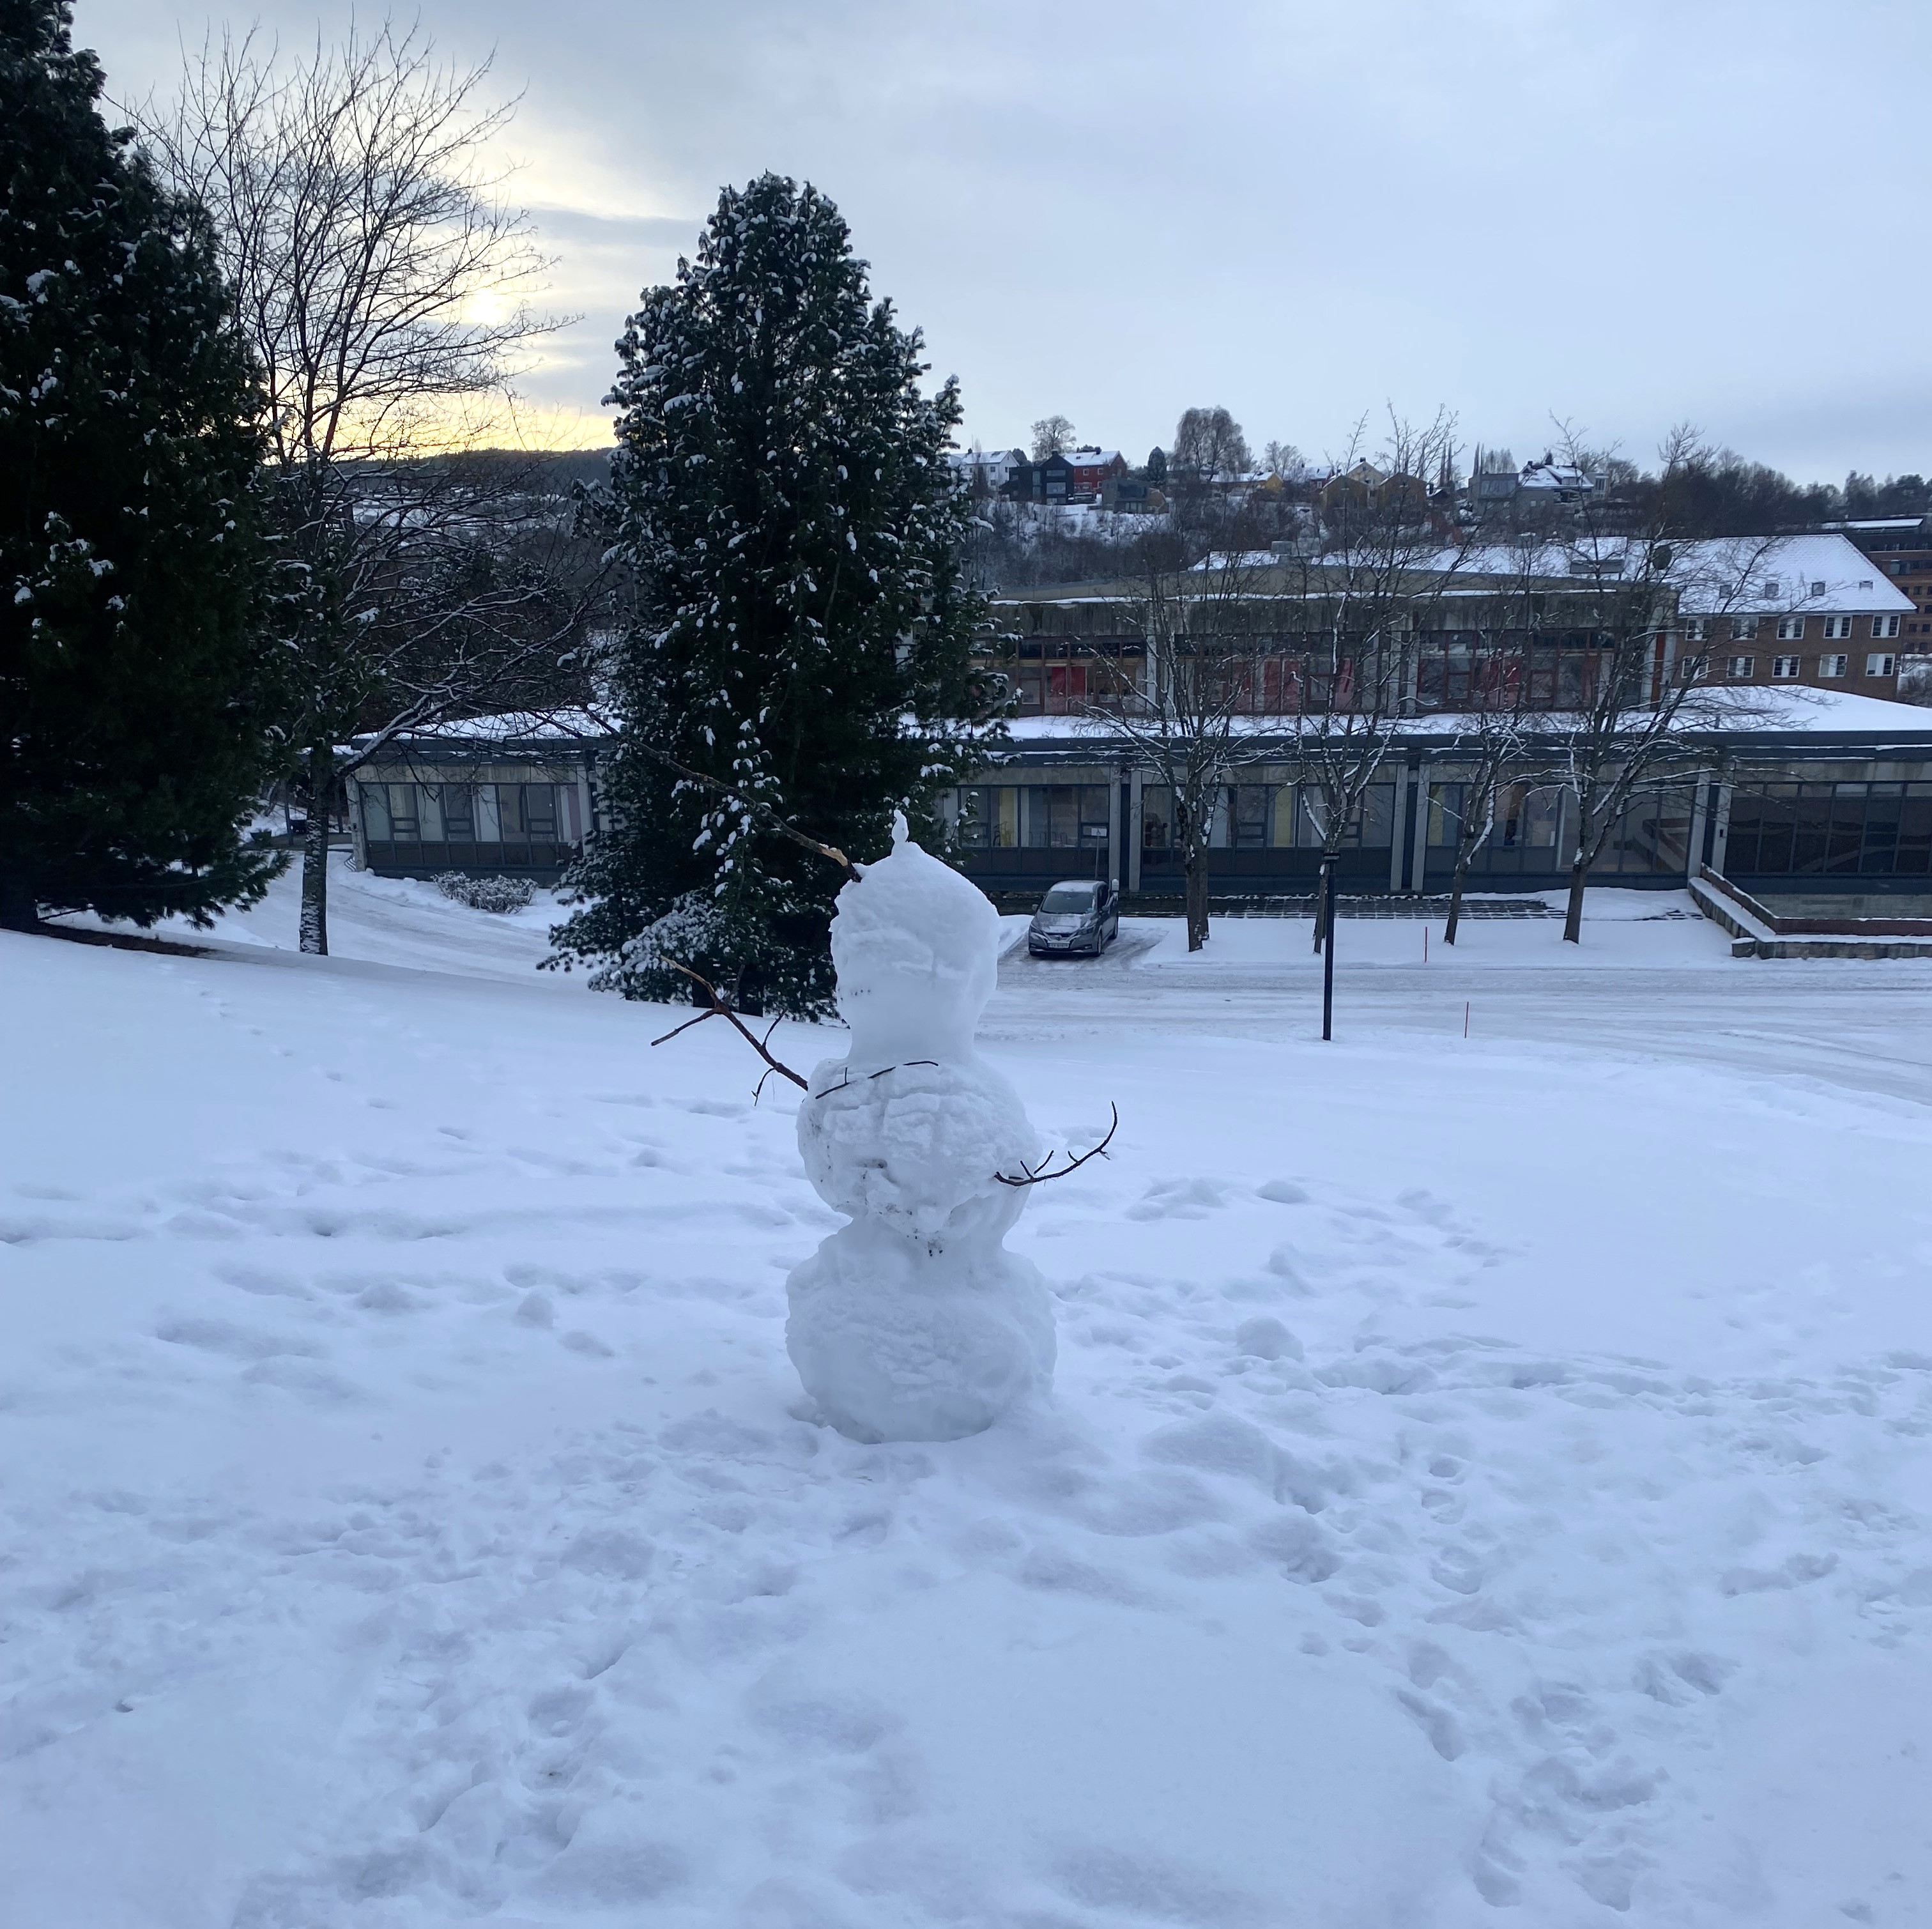 WAITING TIME: While we wait for the spring to come, some people have at least enjoyed the park slope while constructing a tall and proud snowman or lady.